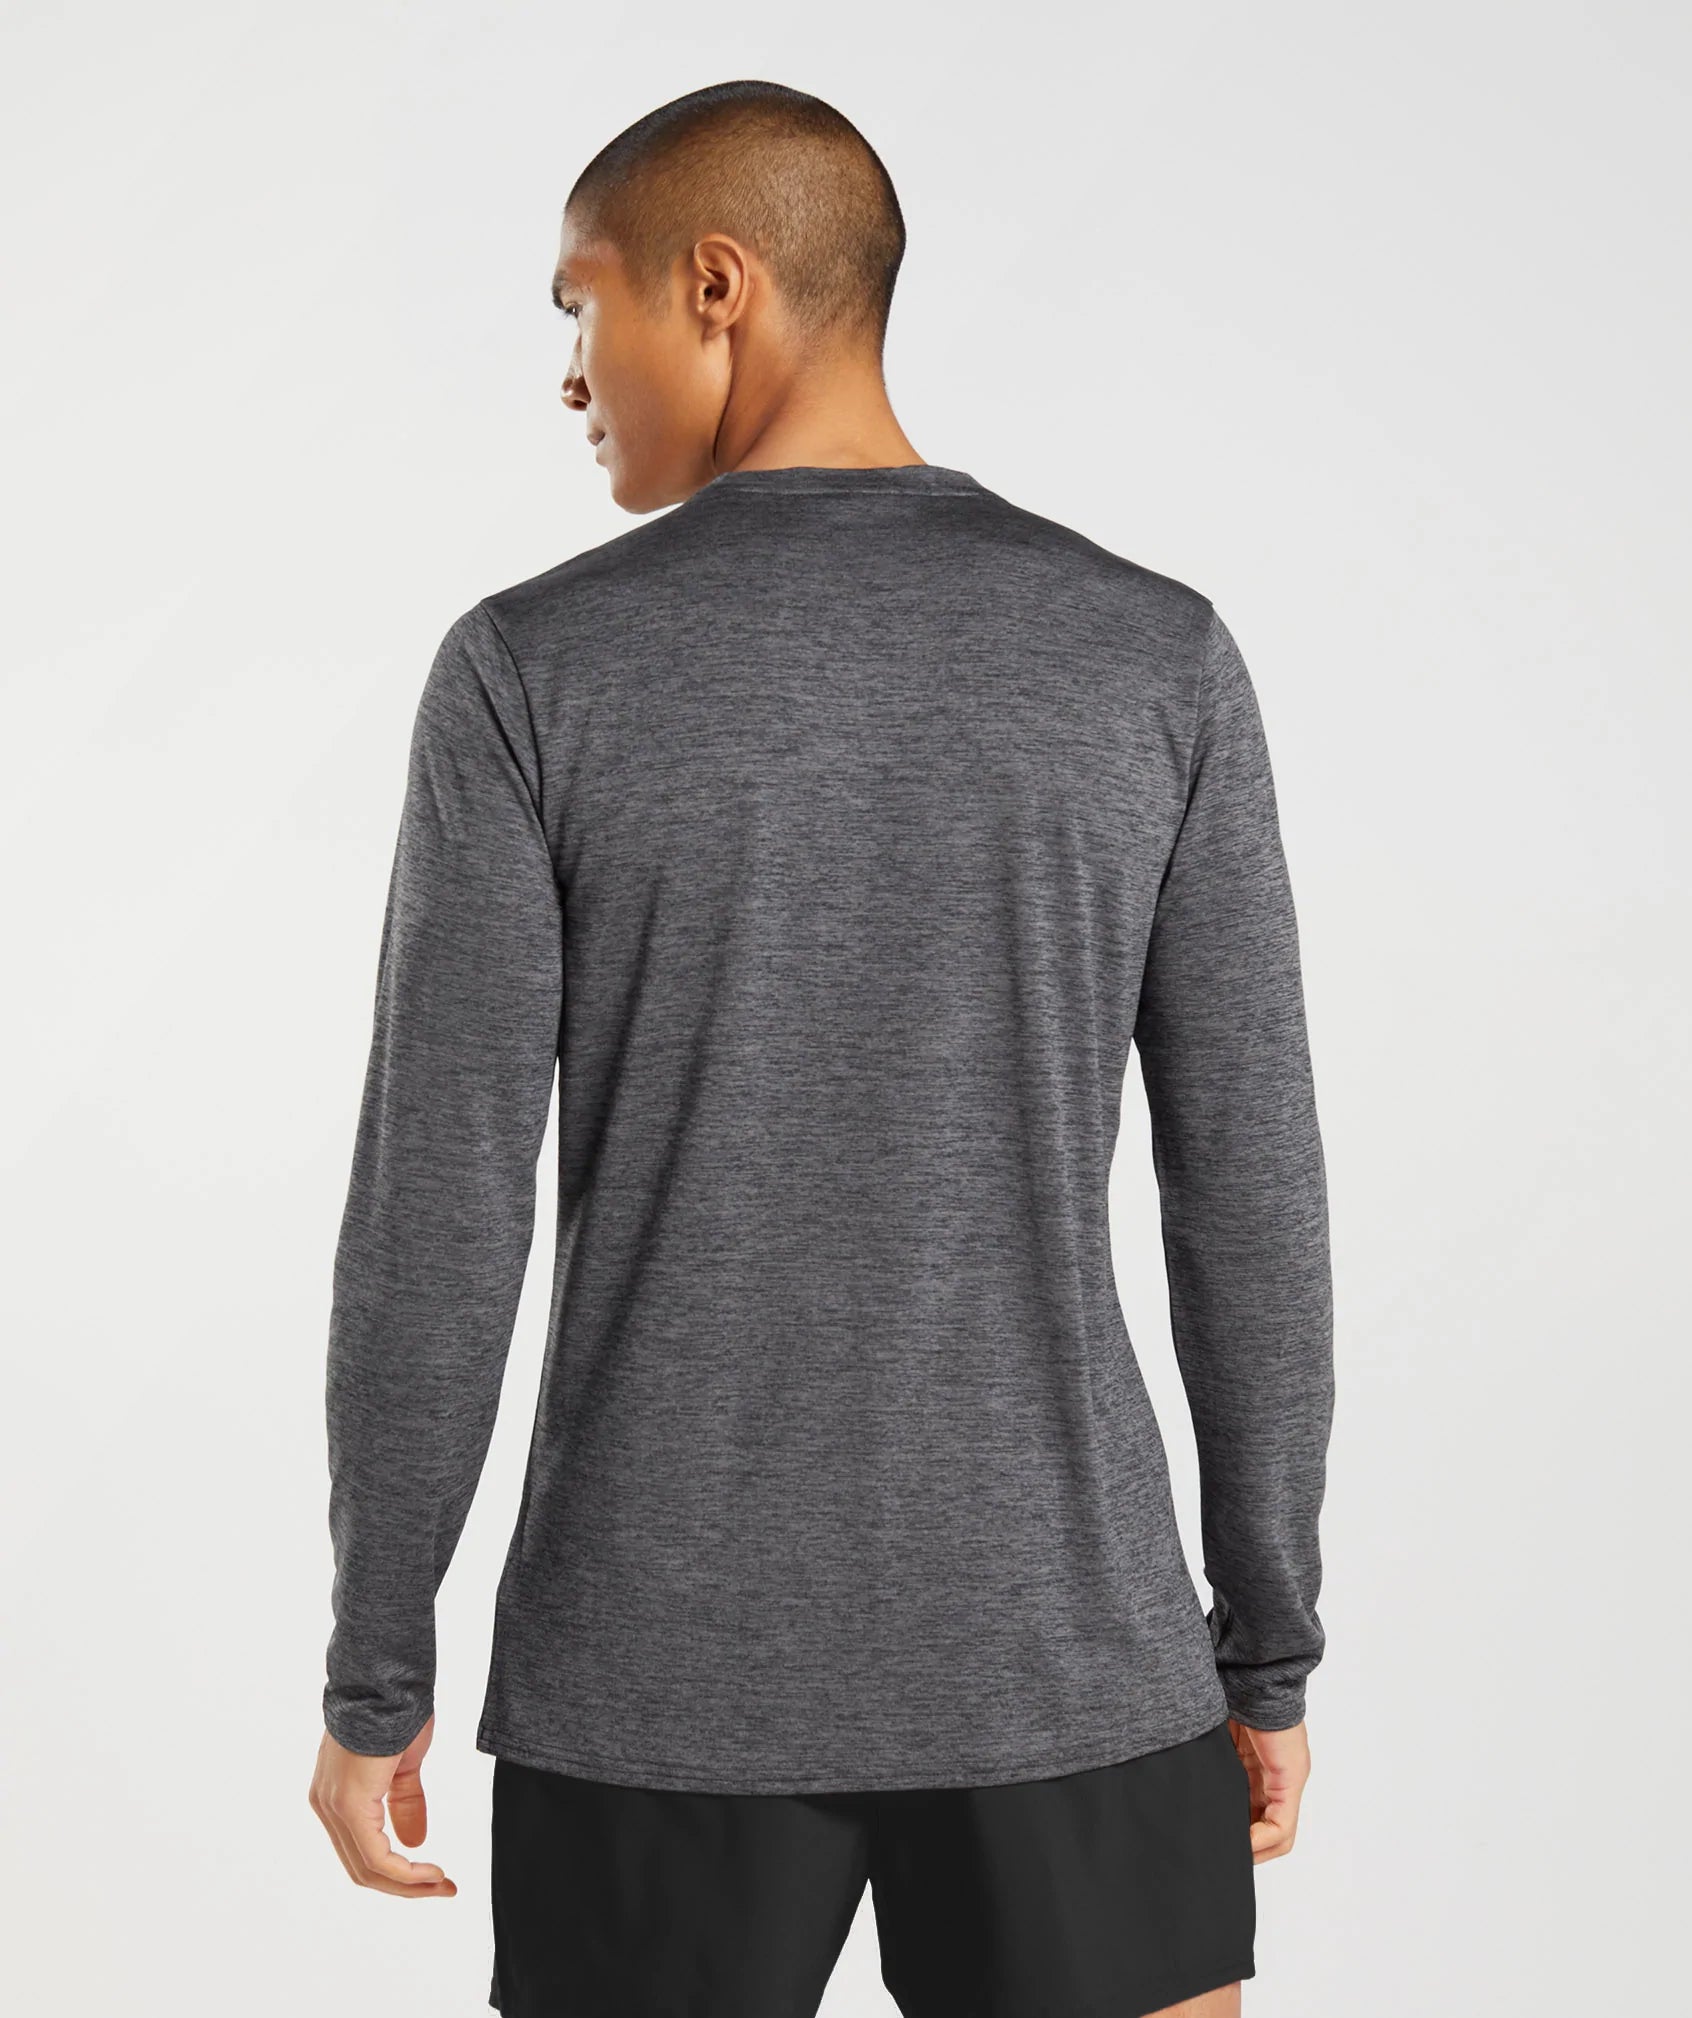 Arrival Long Sleeve T-Shirt in Black/Silhouette Grey Marl - view 2